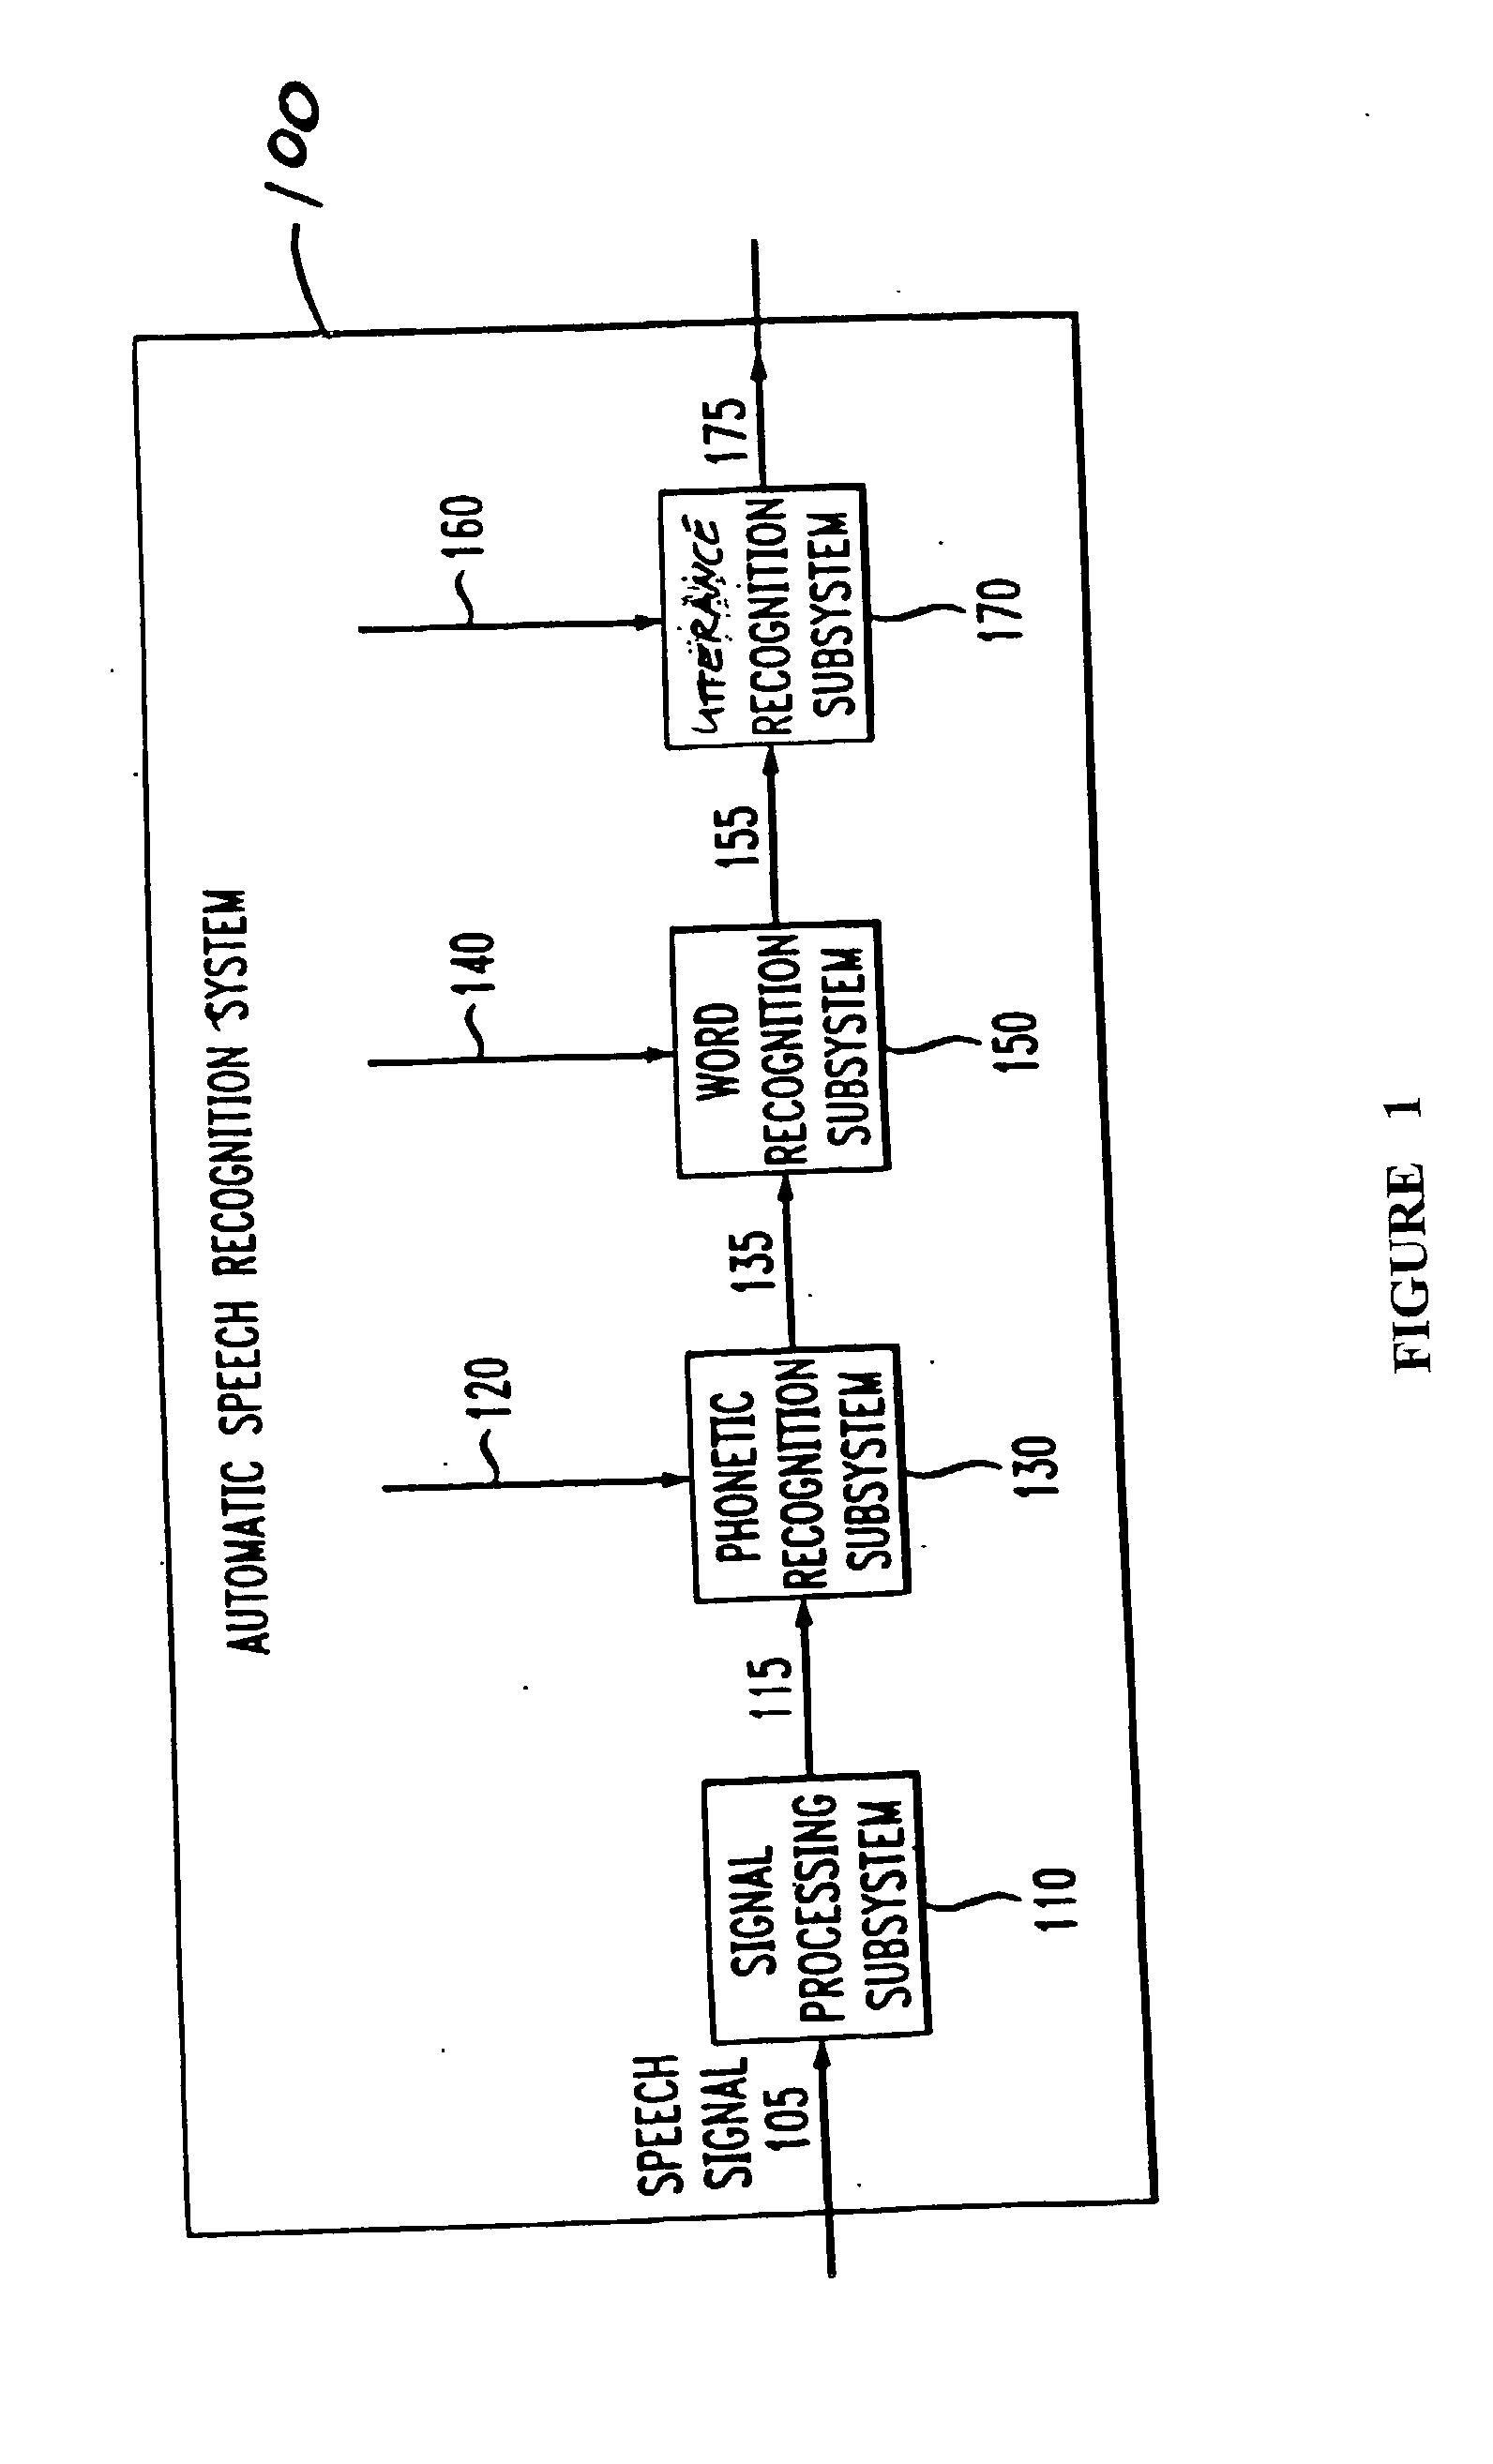 Systems and methods for classifying and representing gestural inputs